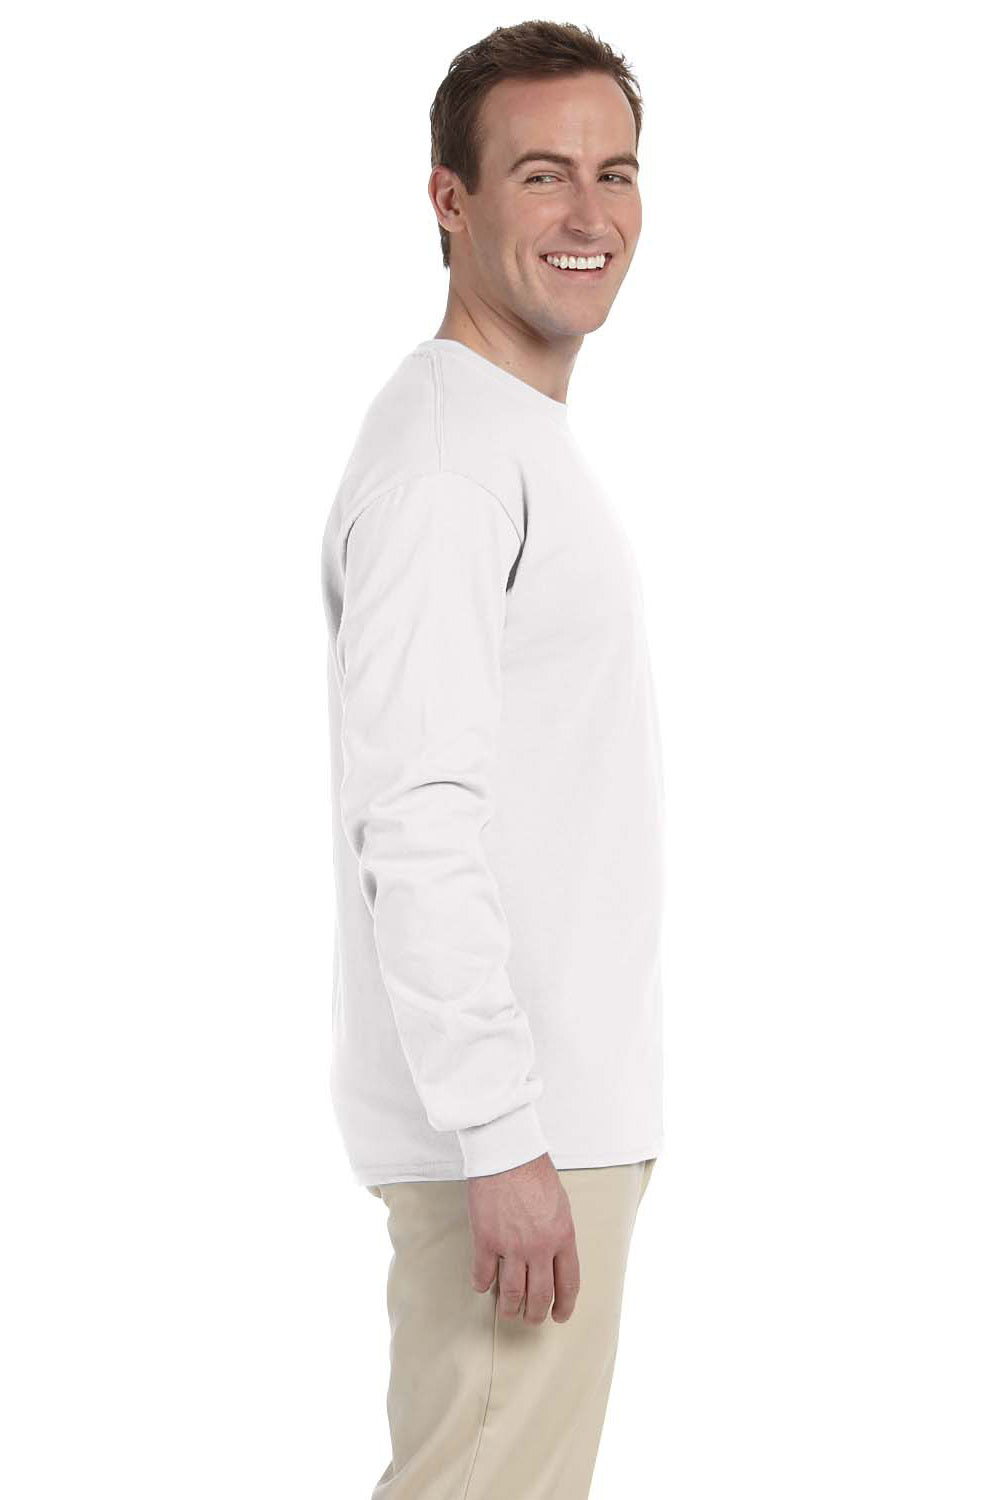 Fruit Of The Loom 4930 Mens HD Jersey Long Sleeve Crewneck T-Shirt White Side